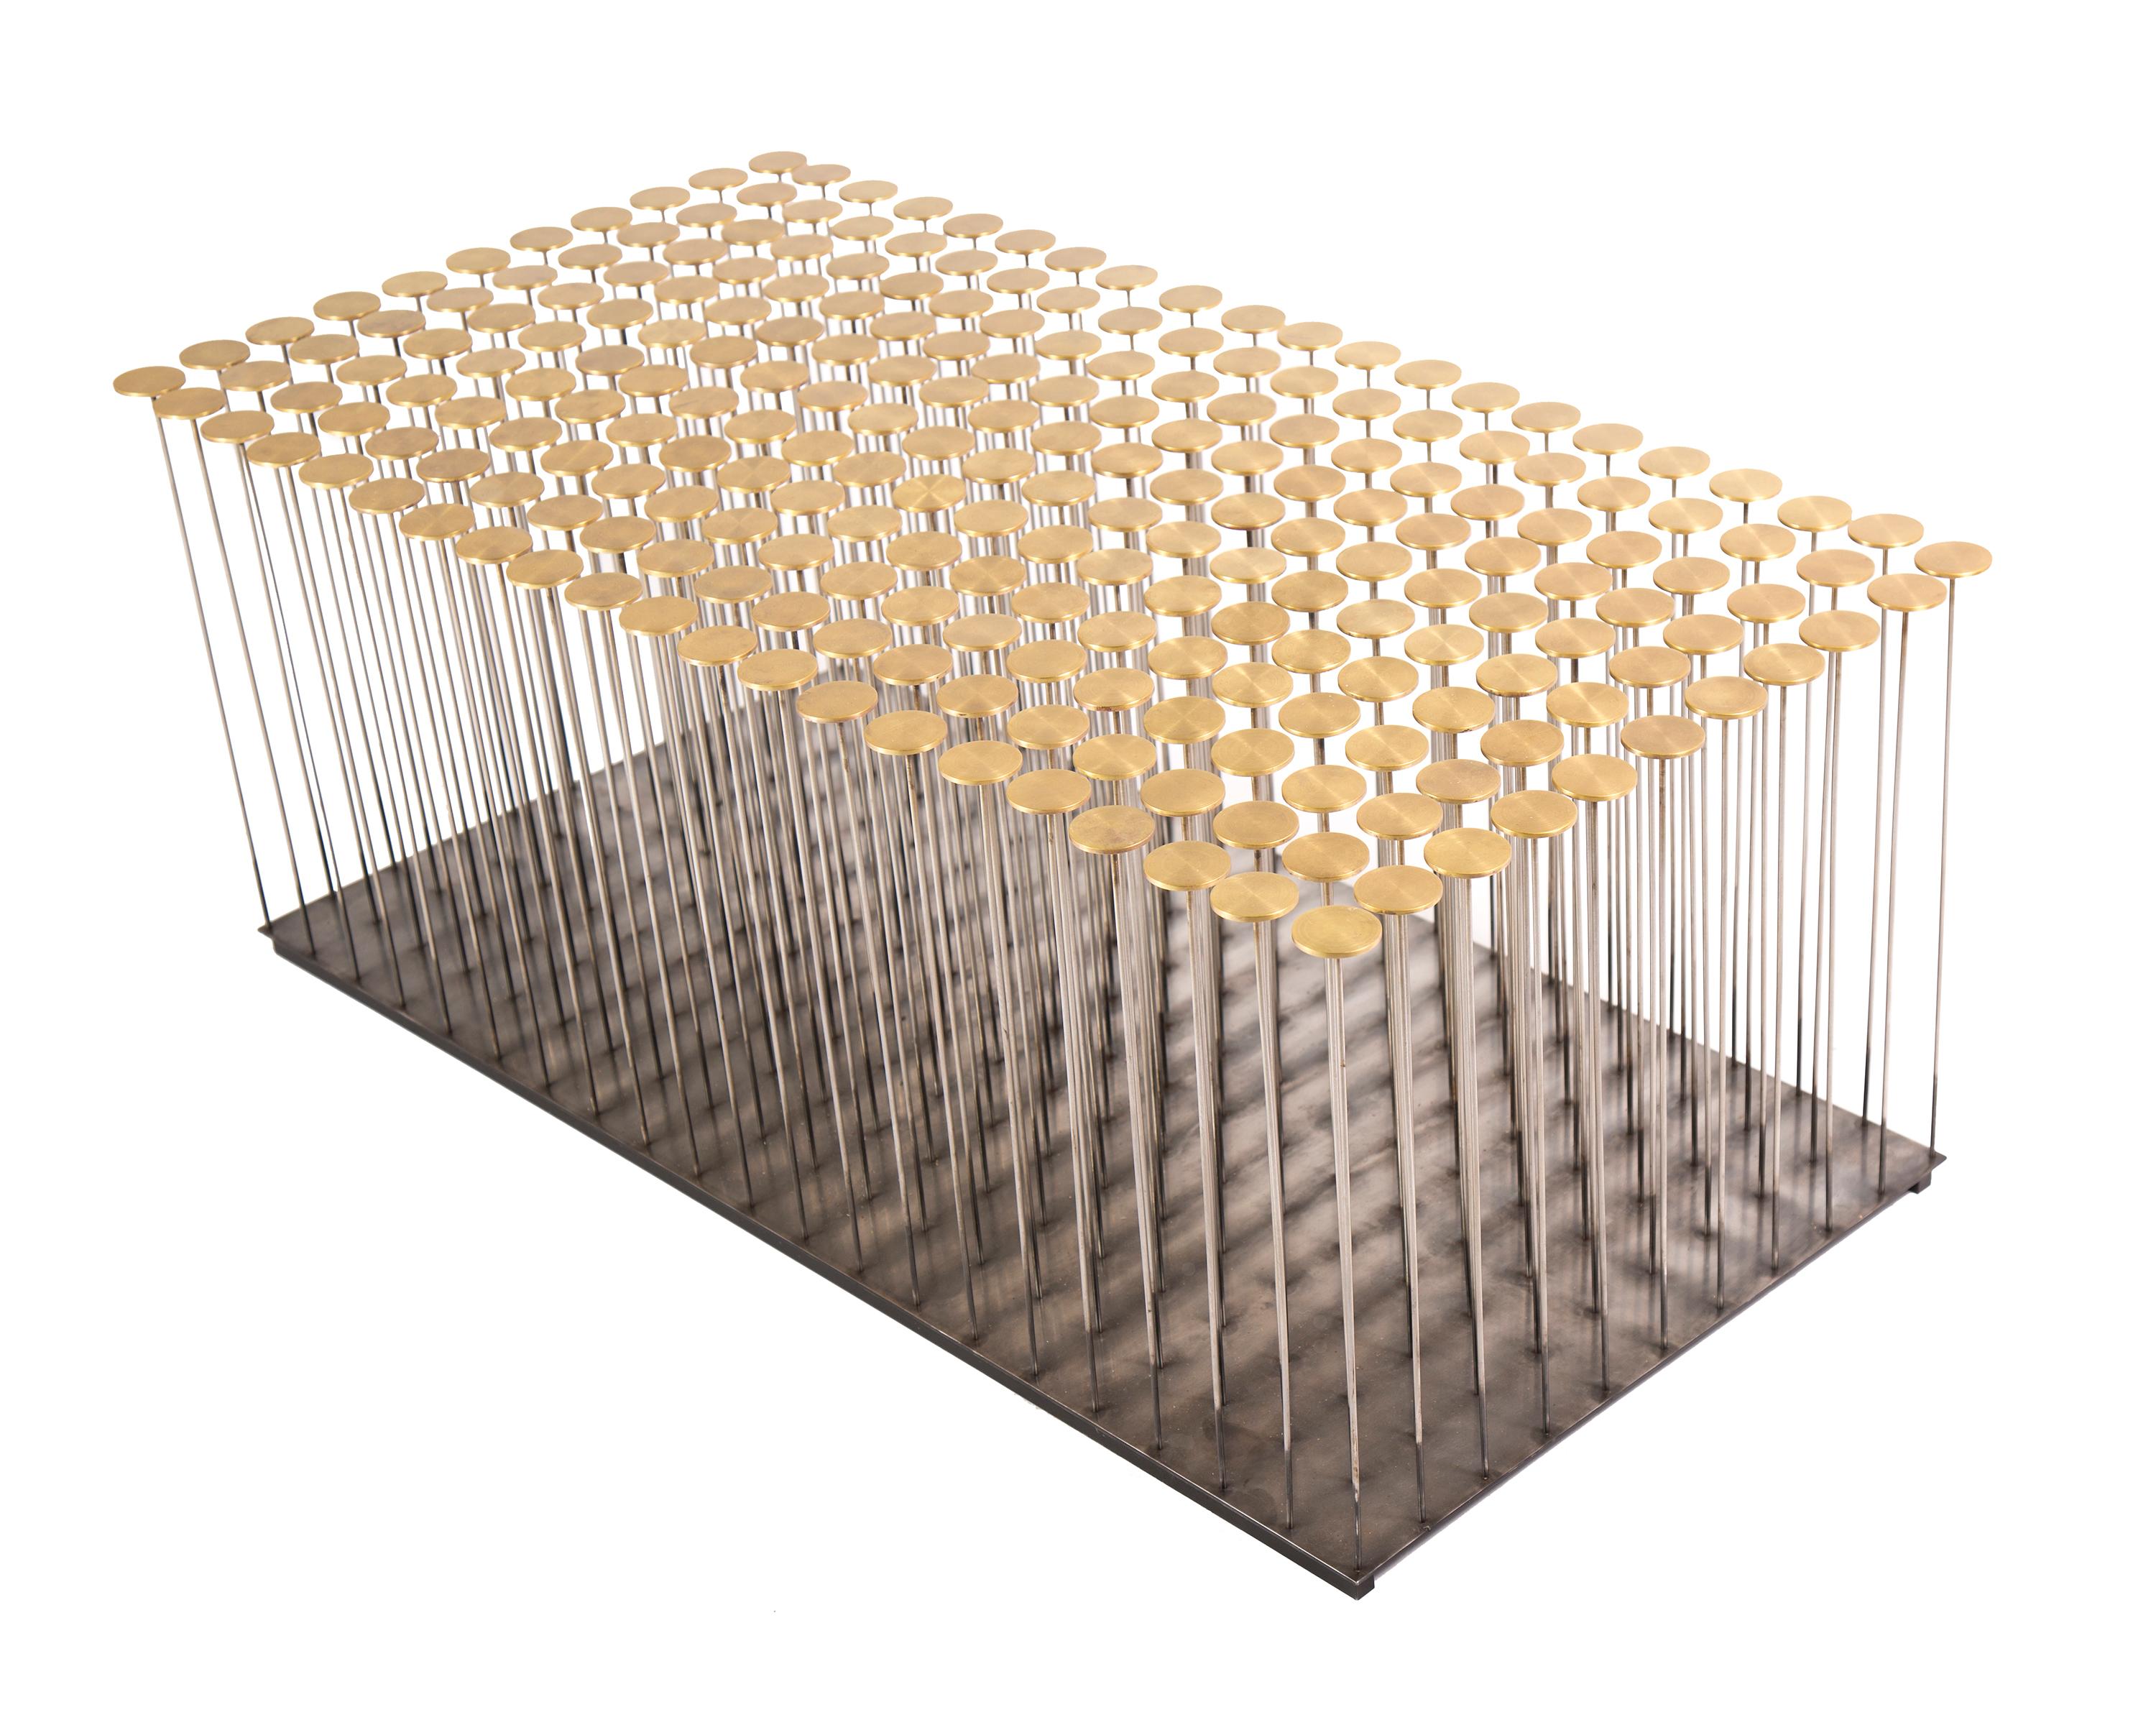 Dischi coffee table by Gentner Design
Dimensions: D 90 x W 45.7 x H 35.5 cm
Materials: brass, darkened stainless steel

With a nod to Harry Bertoia, the Dischi table is both sculptural as it is functional. Amazingly stable as a table surface, this